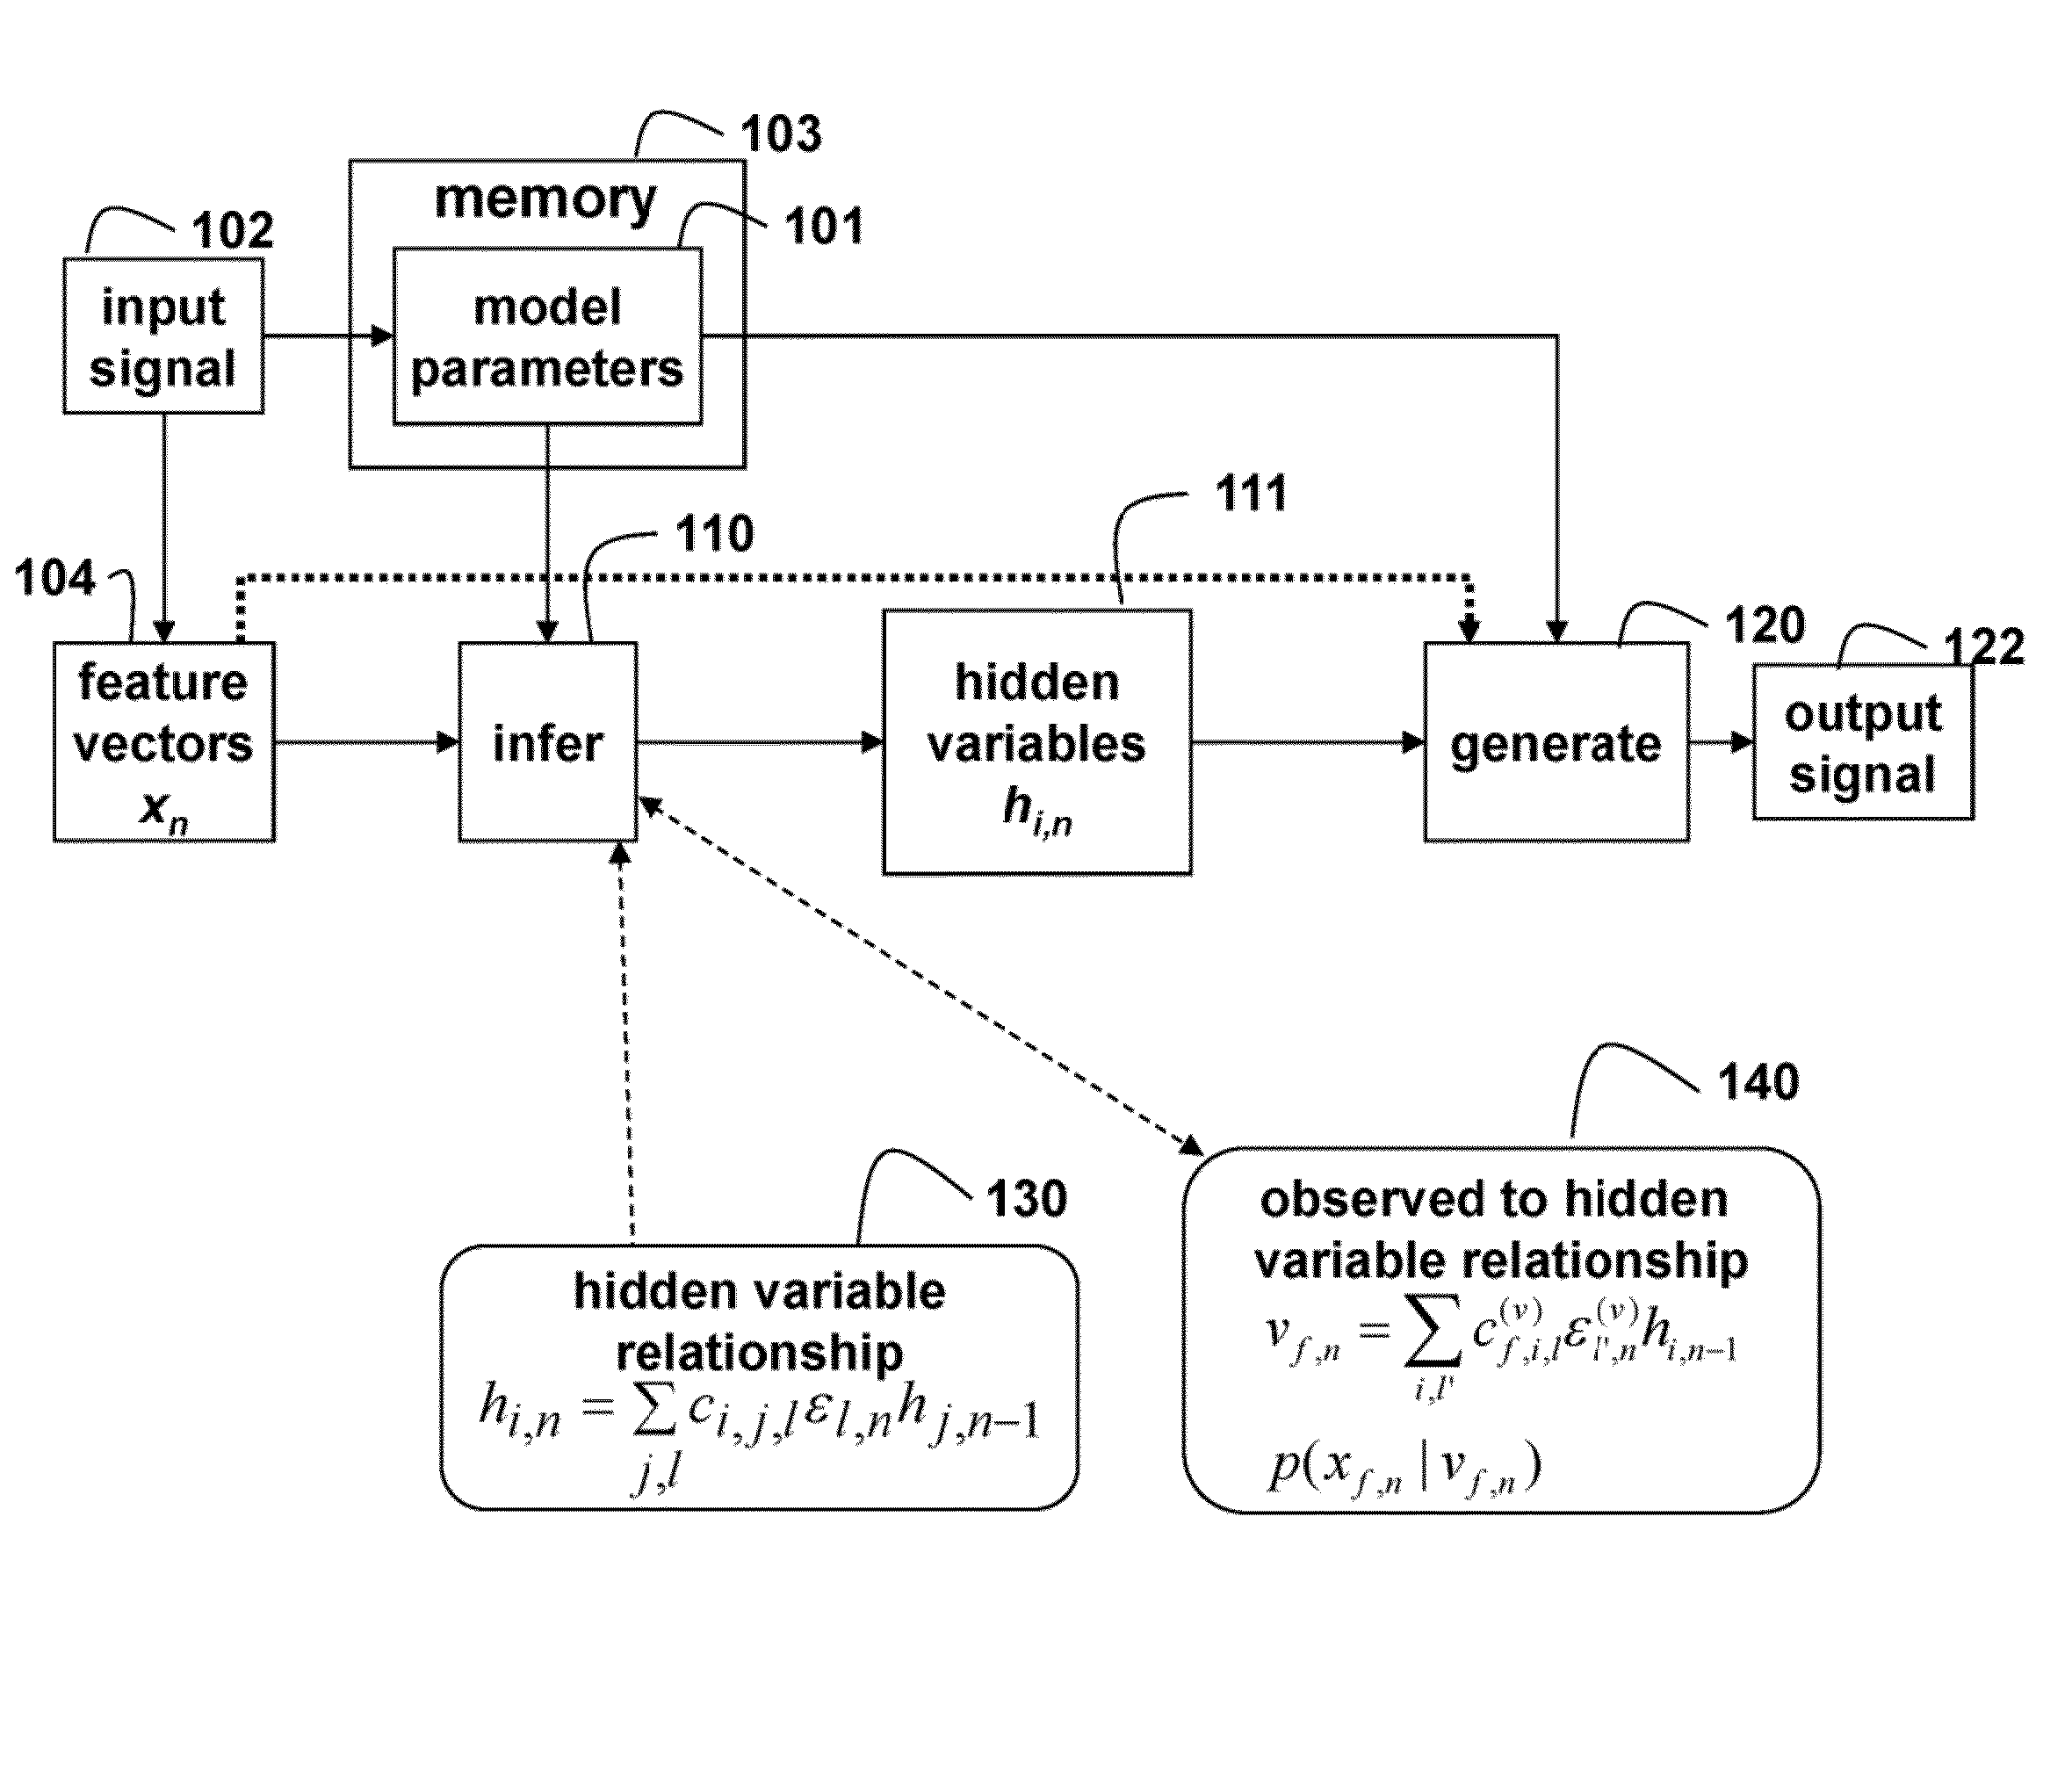 Method for Transforming Non-Stationary Signals Using a Dynamic Model